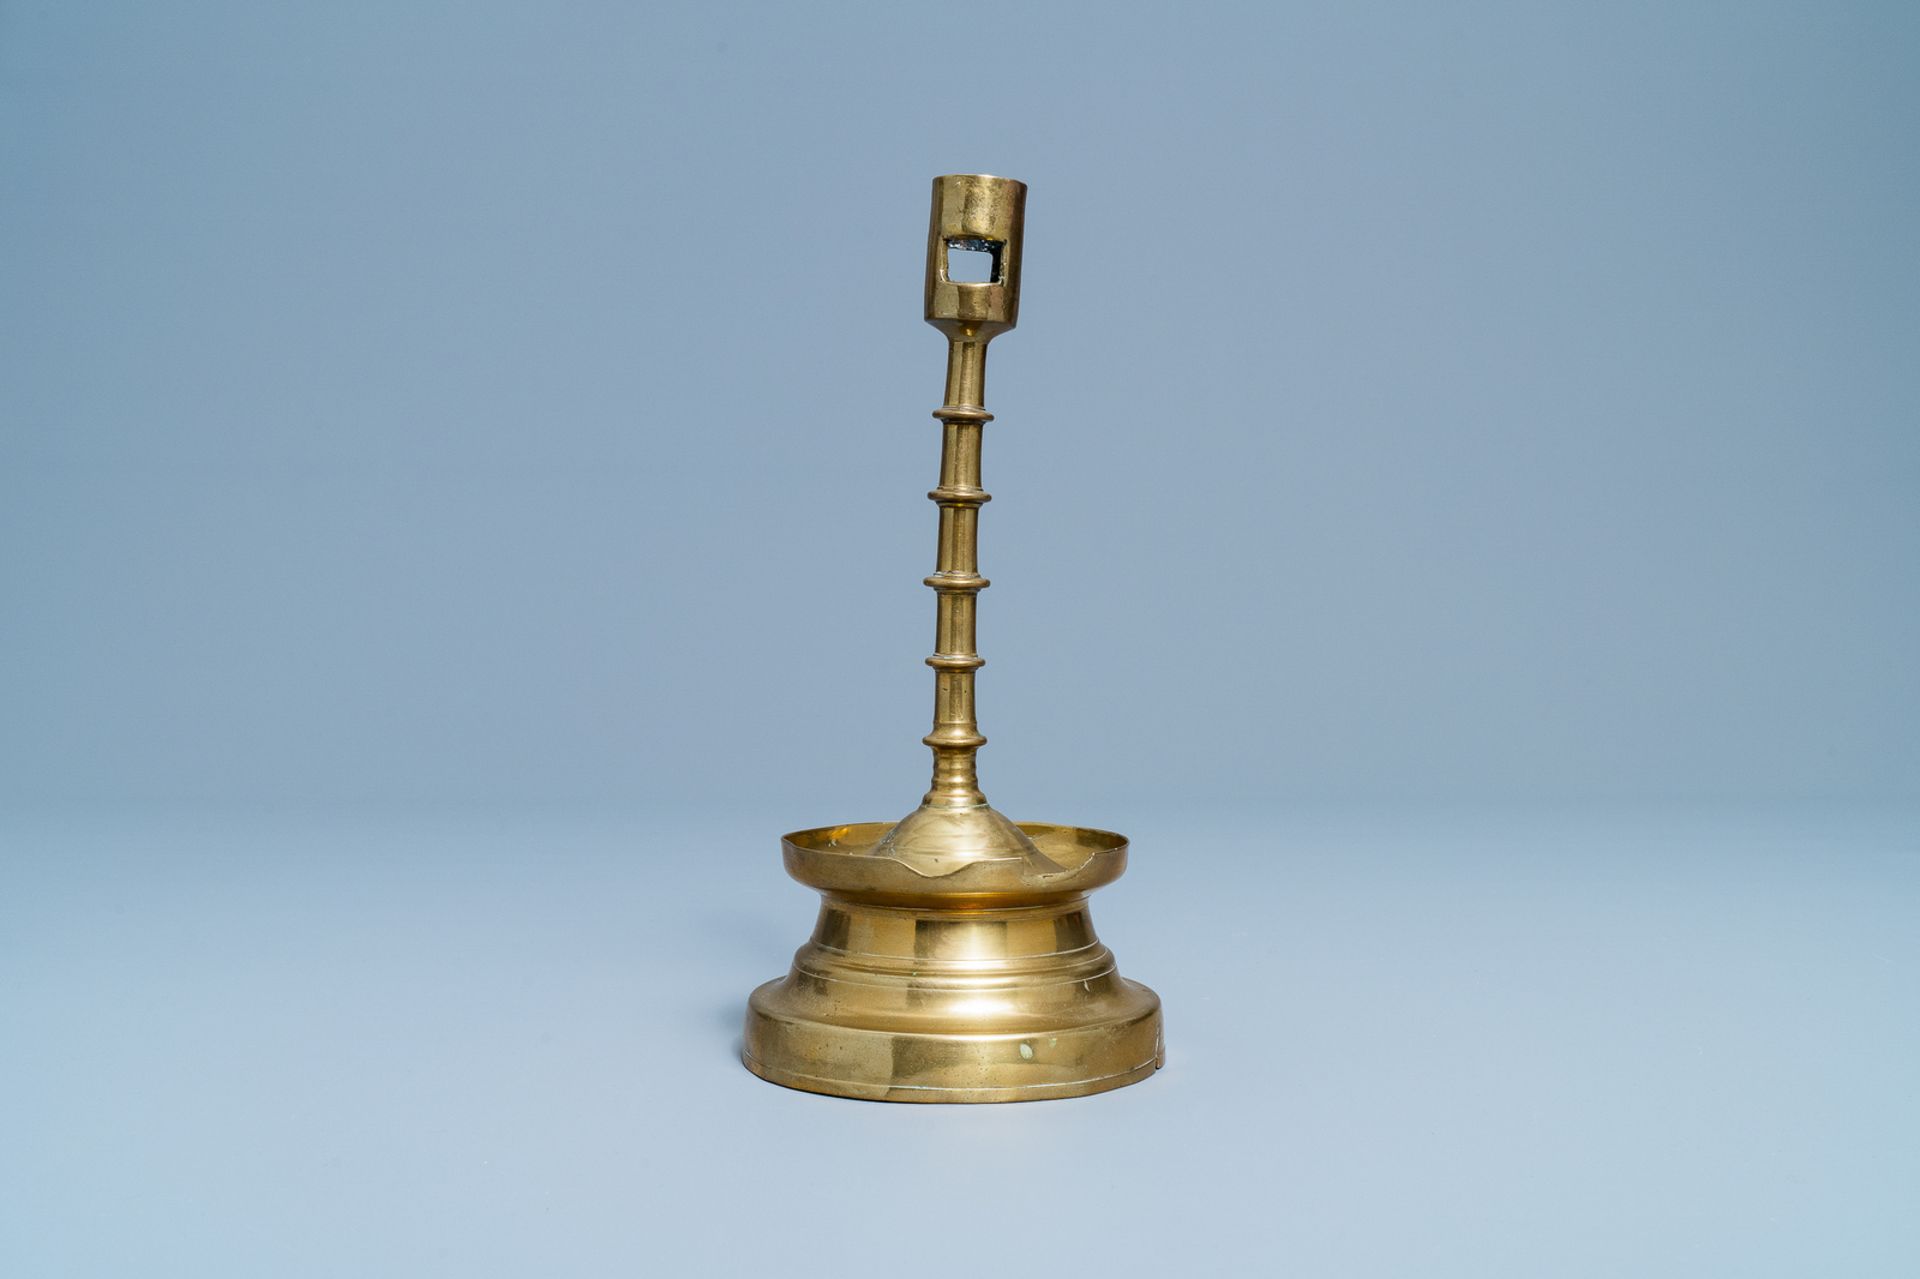 A Flemish or Dutch knotted bronze candlestick, 15th C. - Image 3 of 6